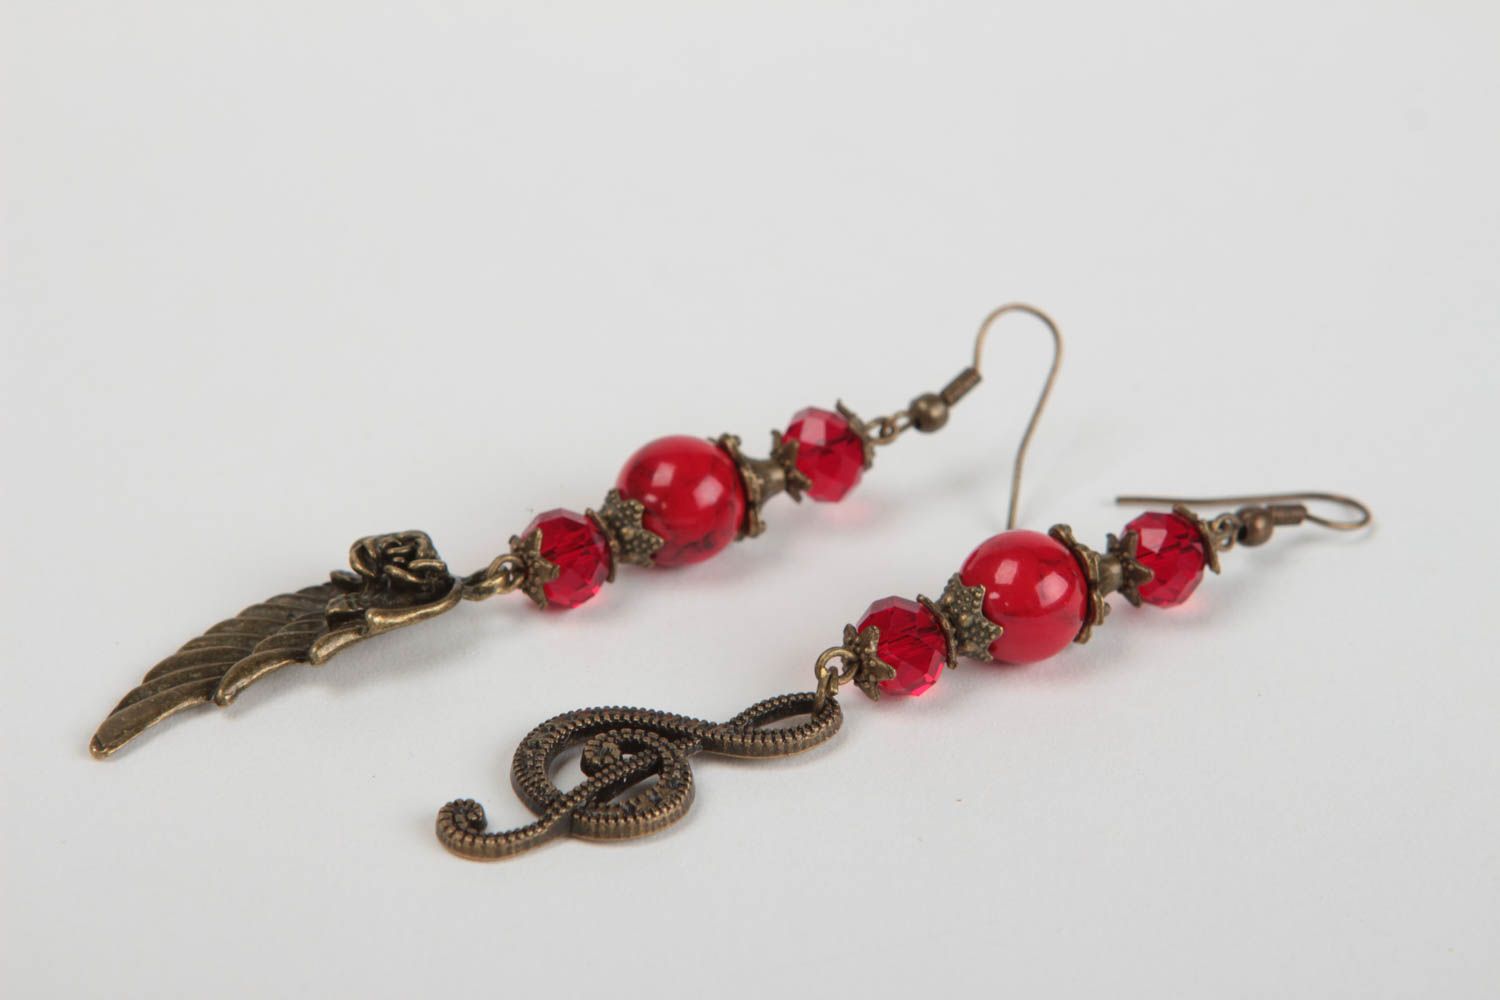 Handmade metal earrings accessory with red beads unusual stylish jewelry photo 3